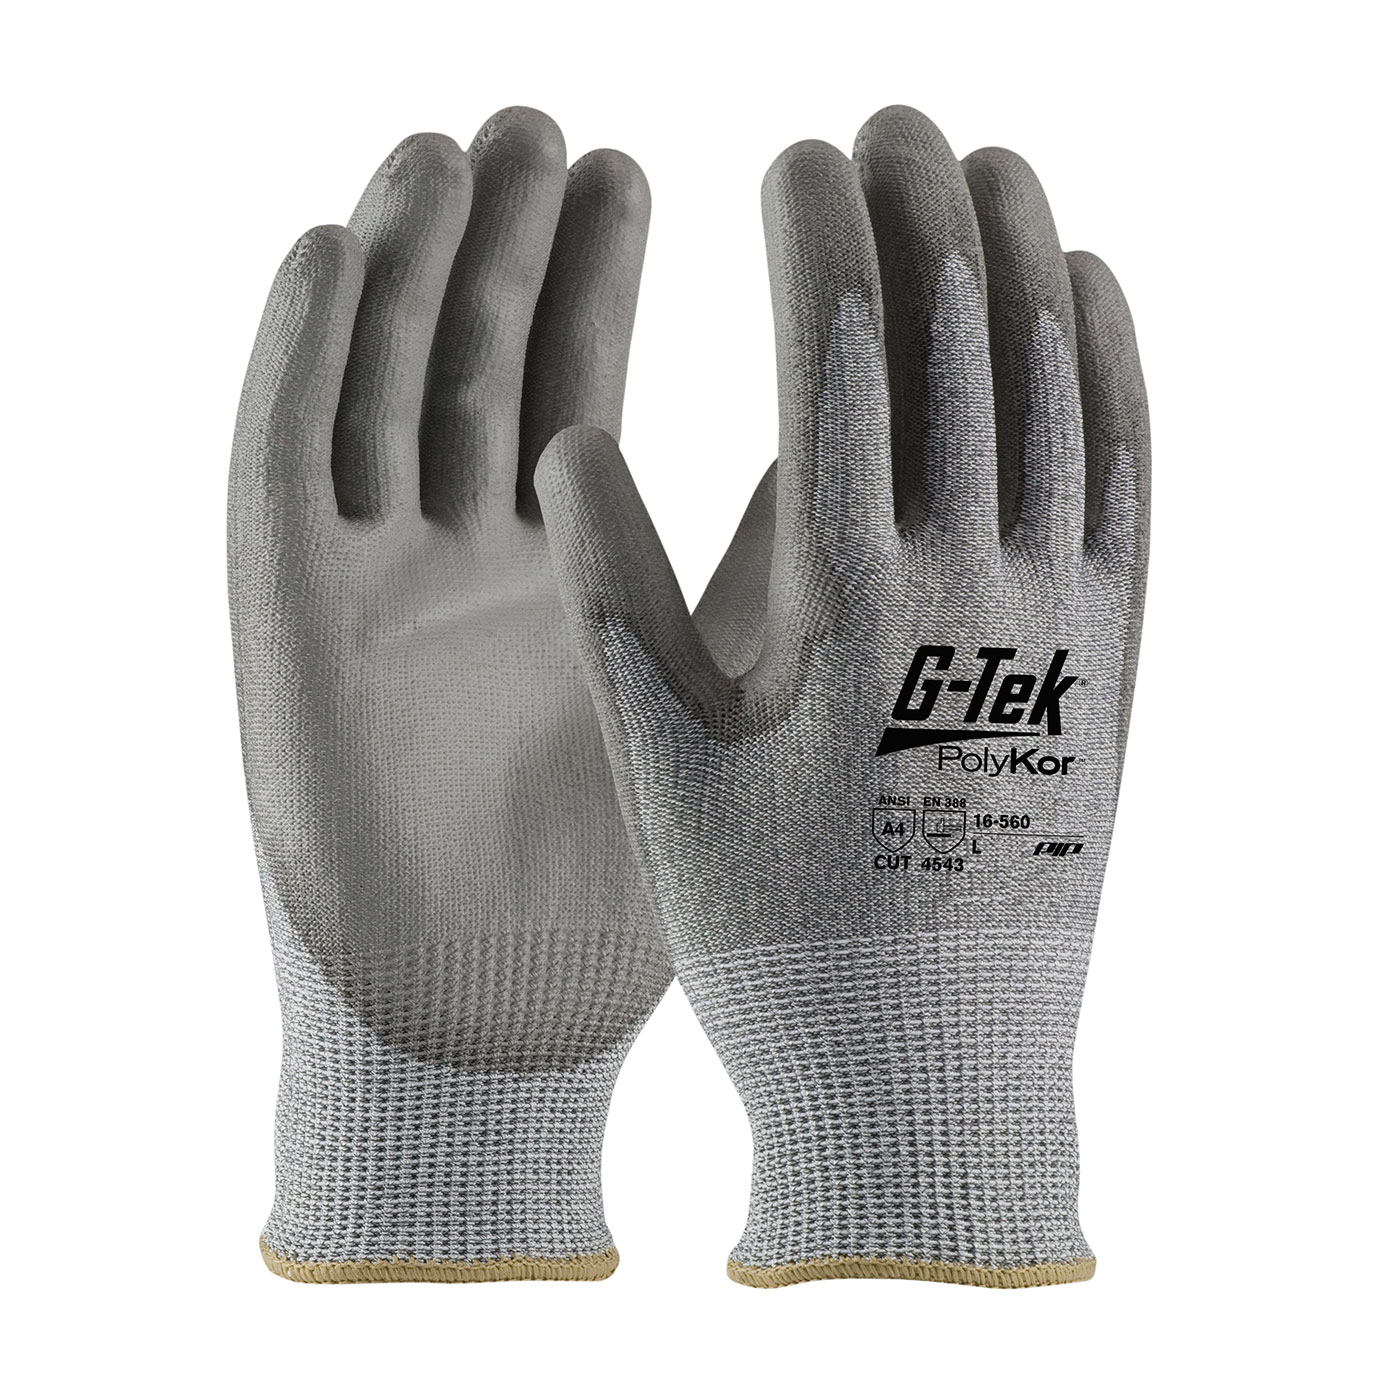 G-Tek® 15-210/XL Cut Resistant Gloves, XL, Micro Surface Nitrile Coating, Suprene™ Engineered Yarn, Knit Wrist Cuff, Resists: Abrasion, Cut, Puncture and Tear, ANSI Cut-Resistance Level: A4